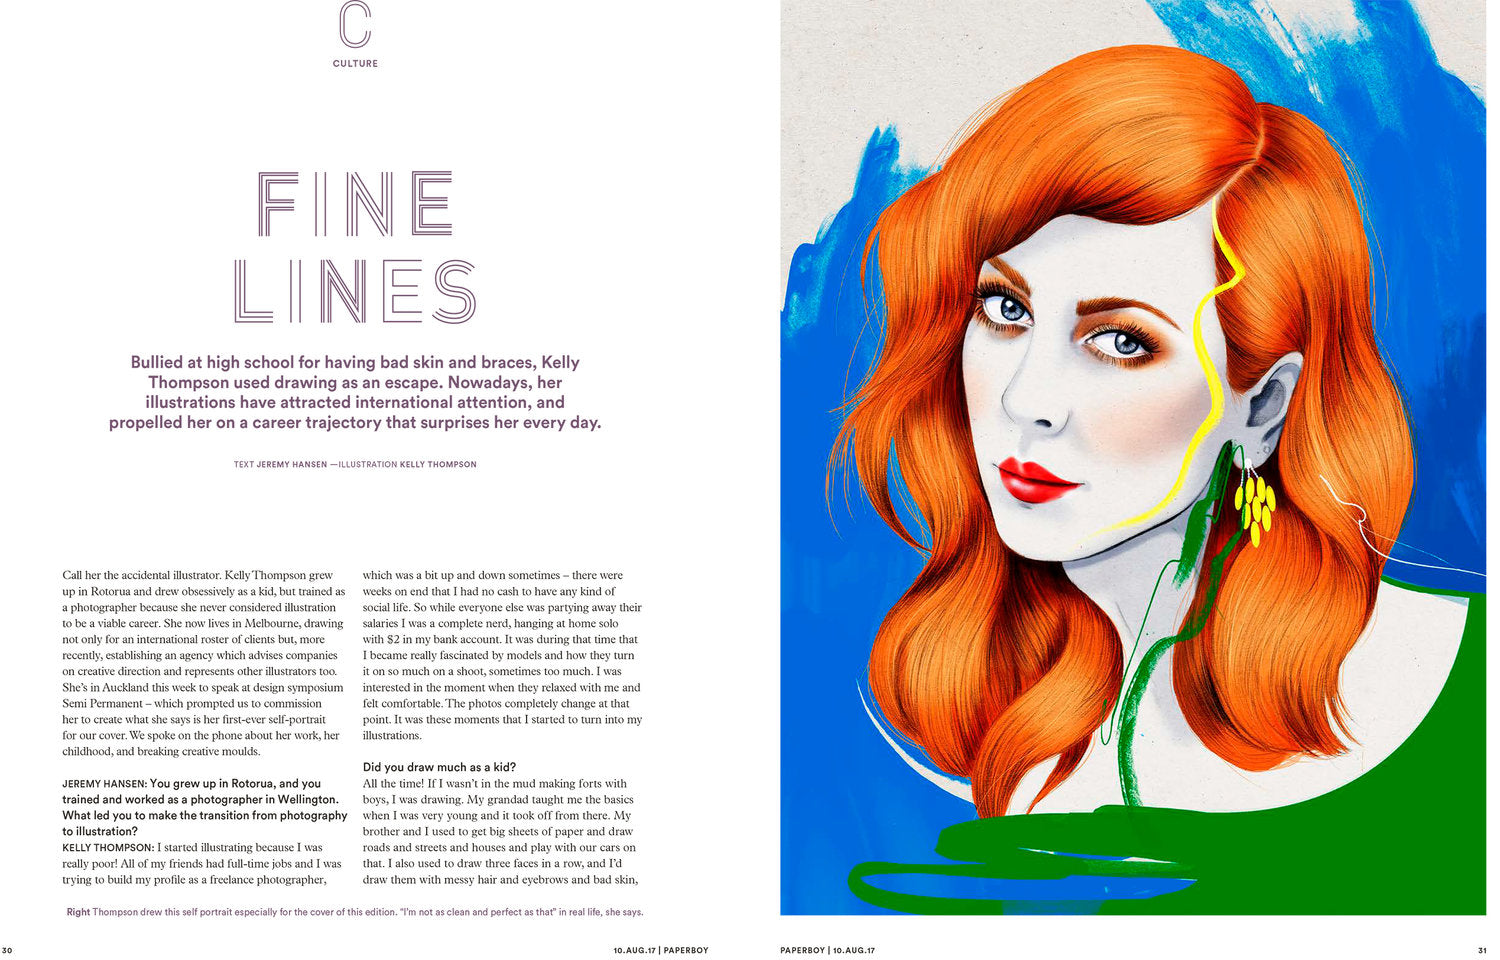 Melbourne Illustrator Kelly Thompson Paperboy Magazine cover self portrait and article